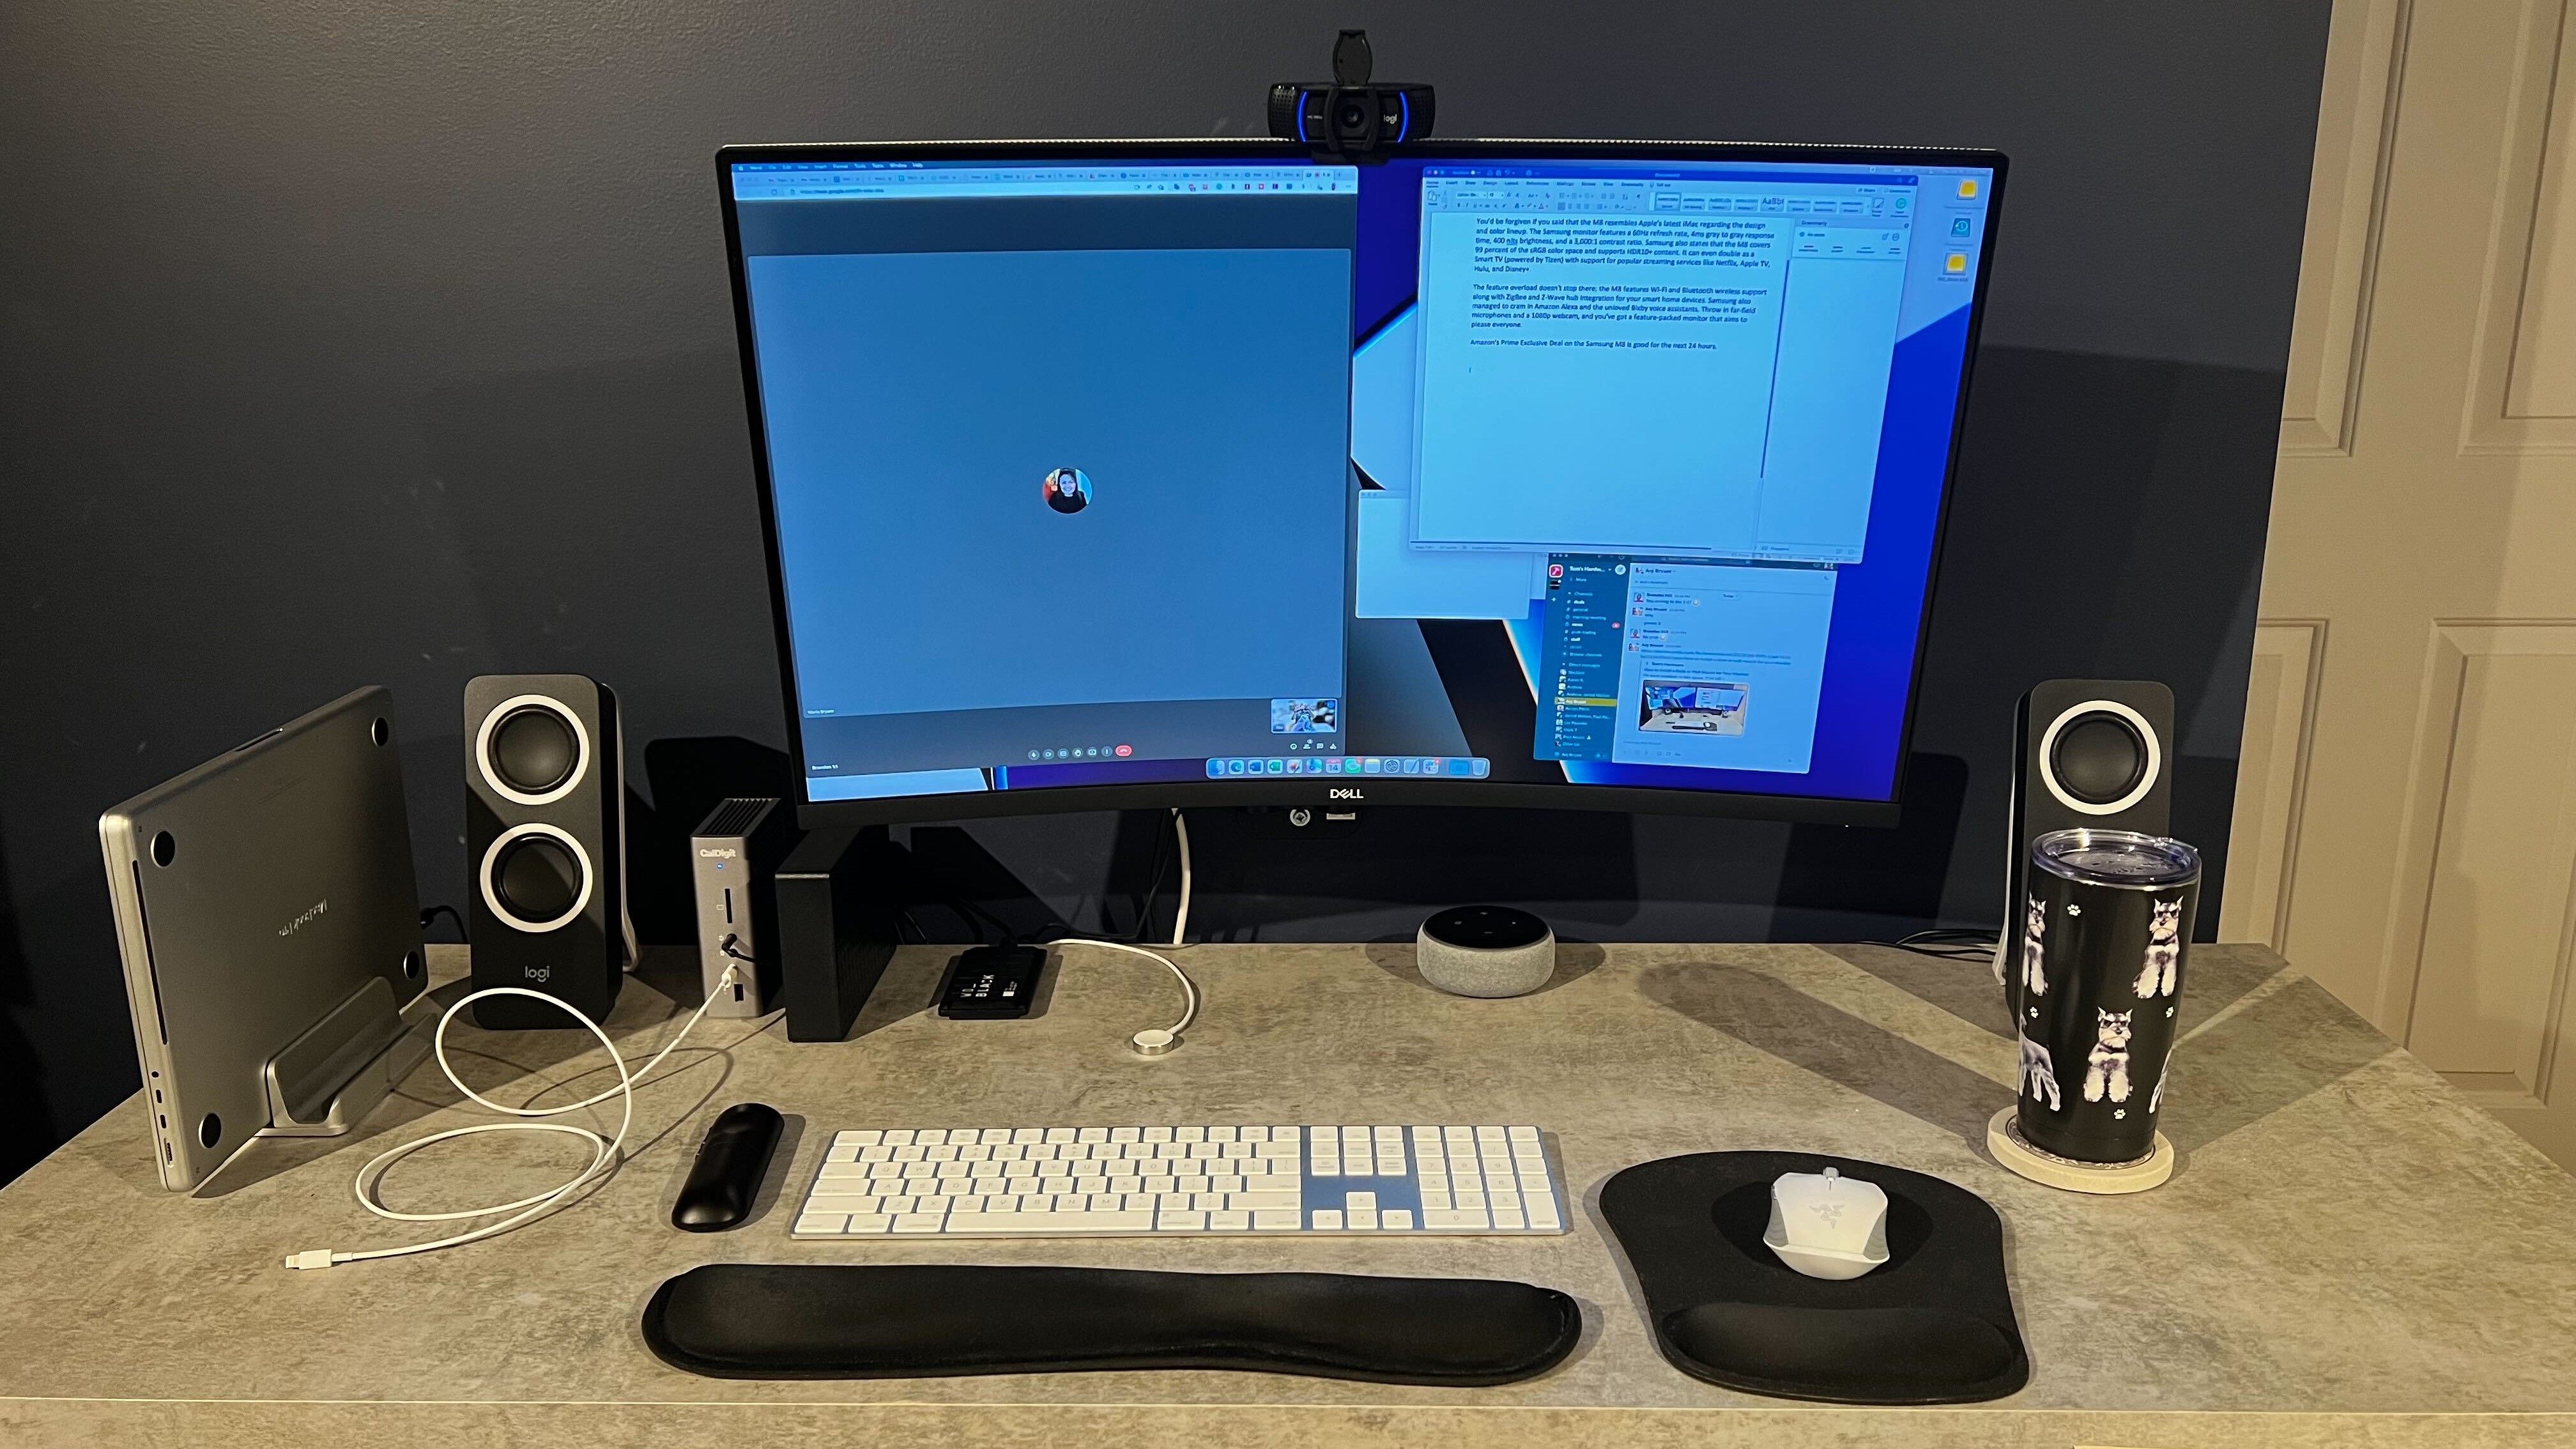 How to Install a Desk or Wall Mount for Your Monitor